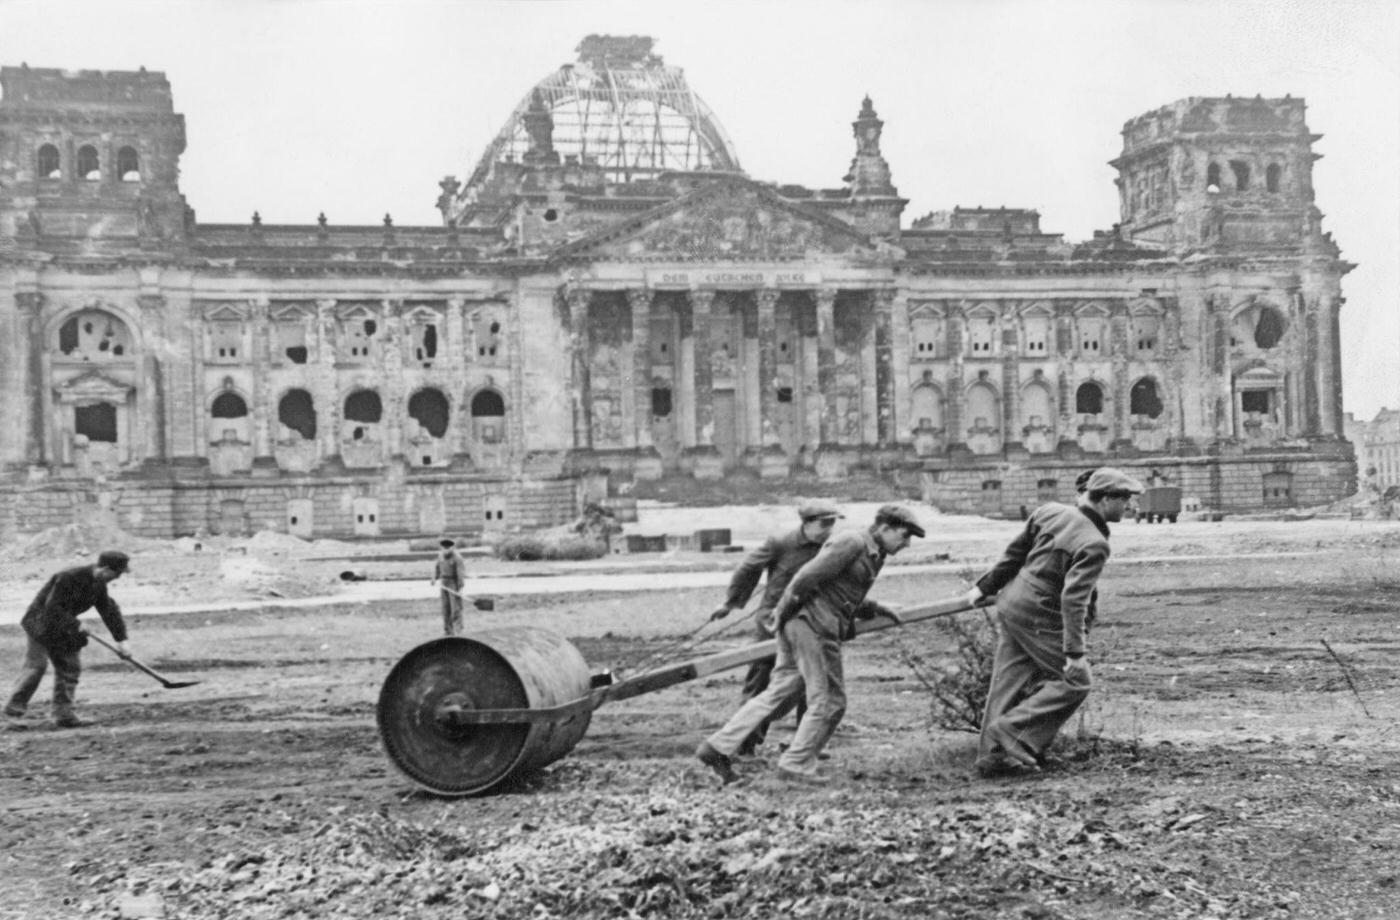 Workers flatten the wasteland in front of the ruined Reichstag in preparation for the 'Day of National Work,' 1947.